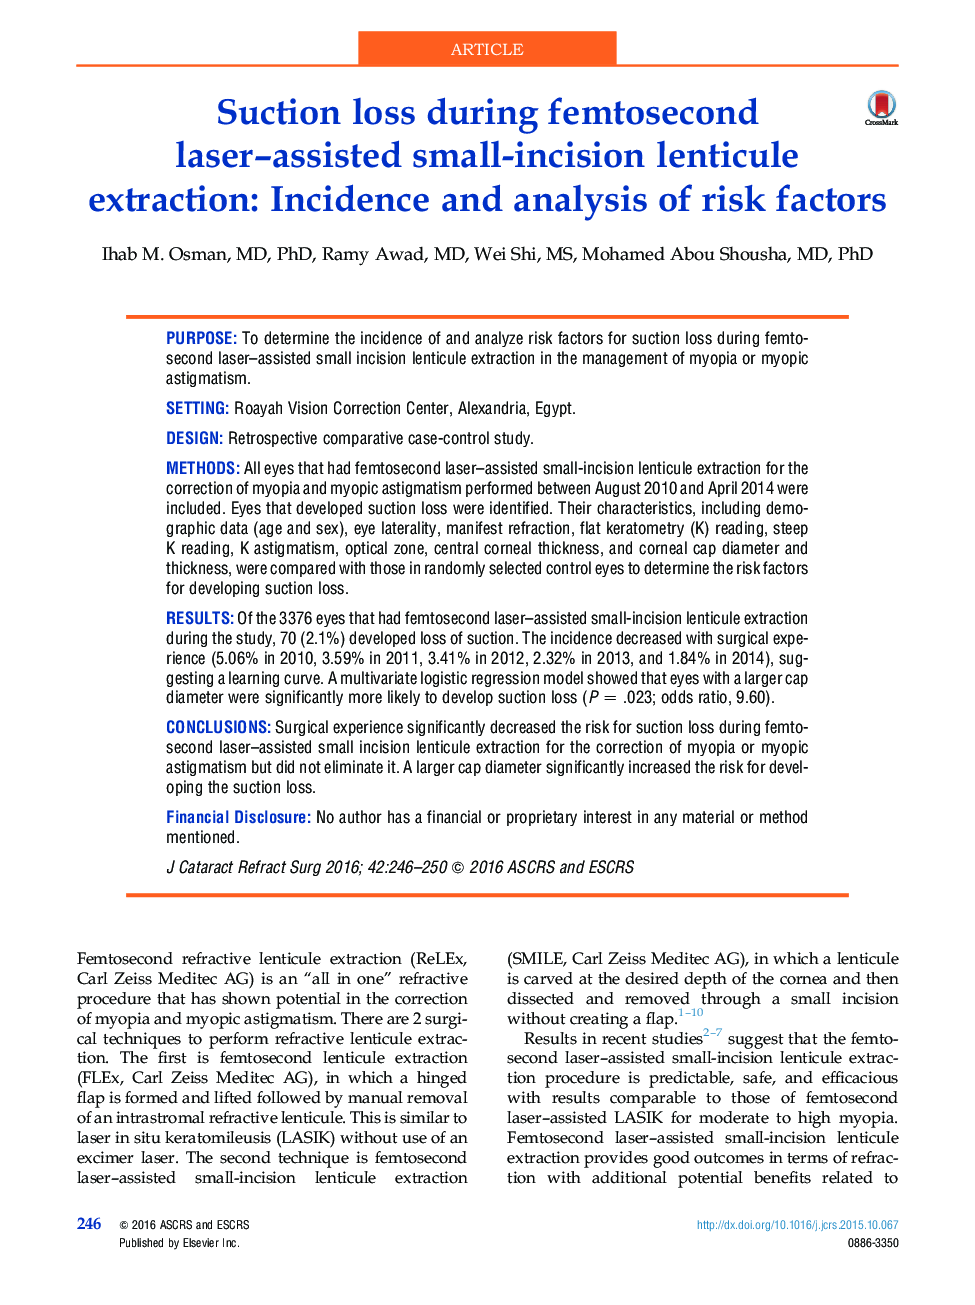 Suction loss during femtosecond laser-assisted small-incision lenticule extraction: Incidence and analysis of risk factors